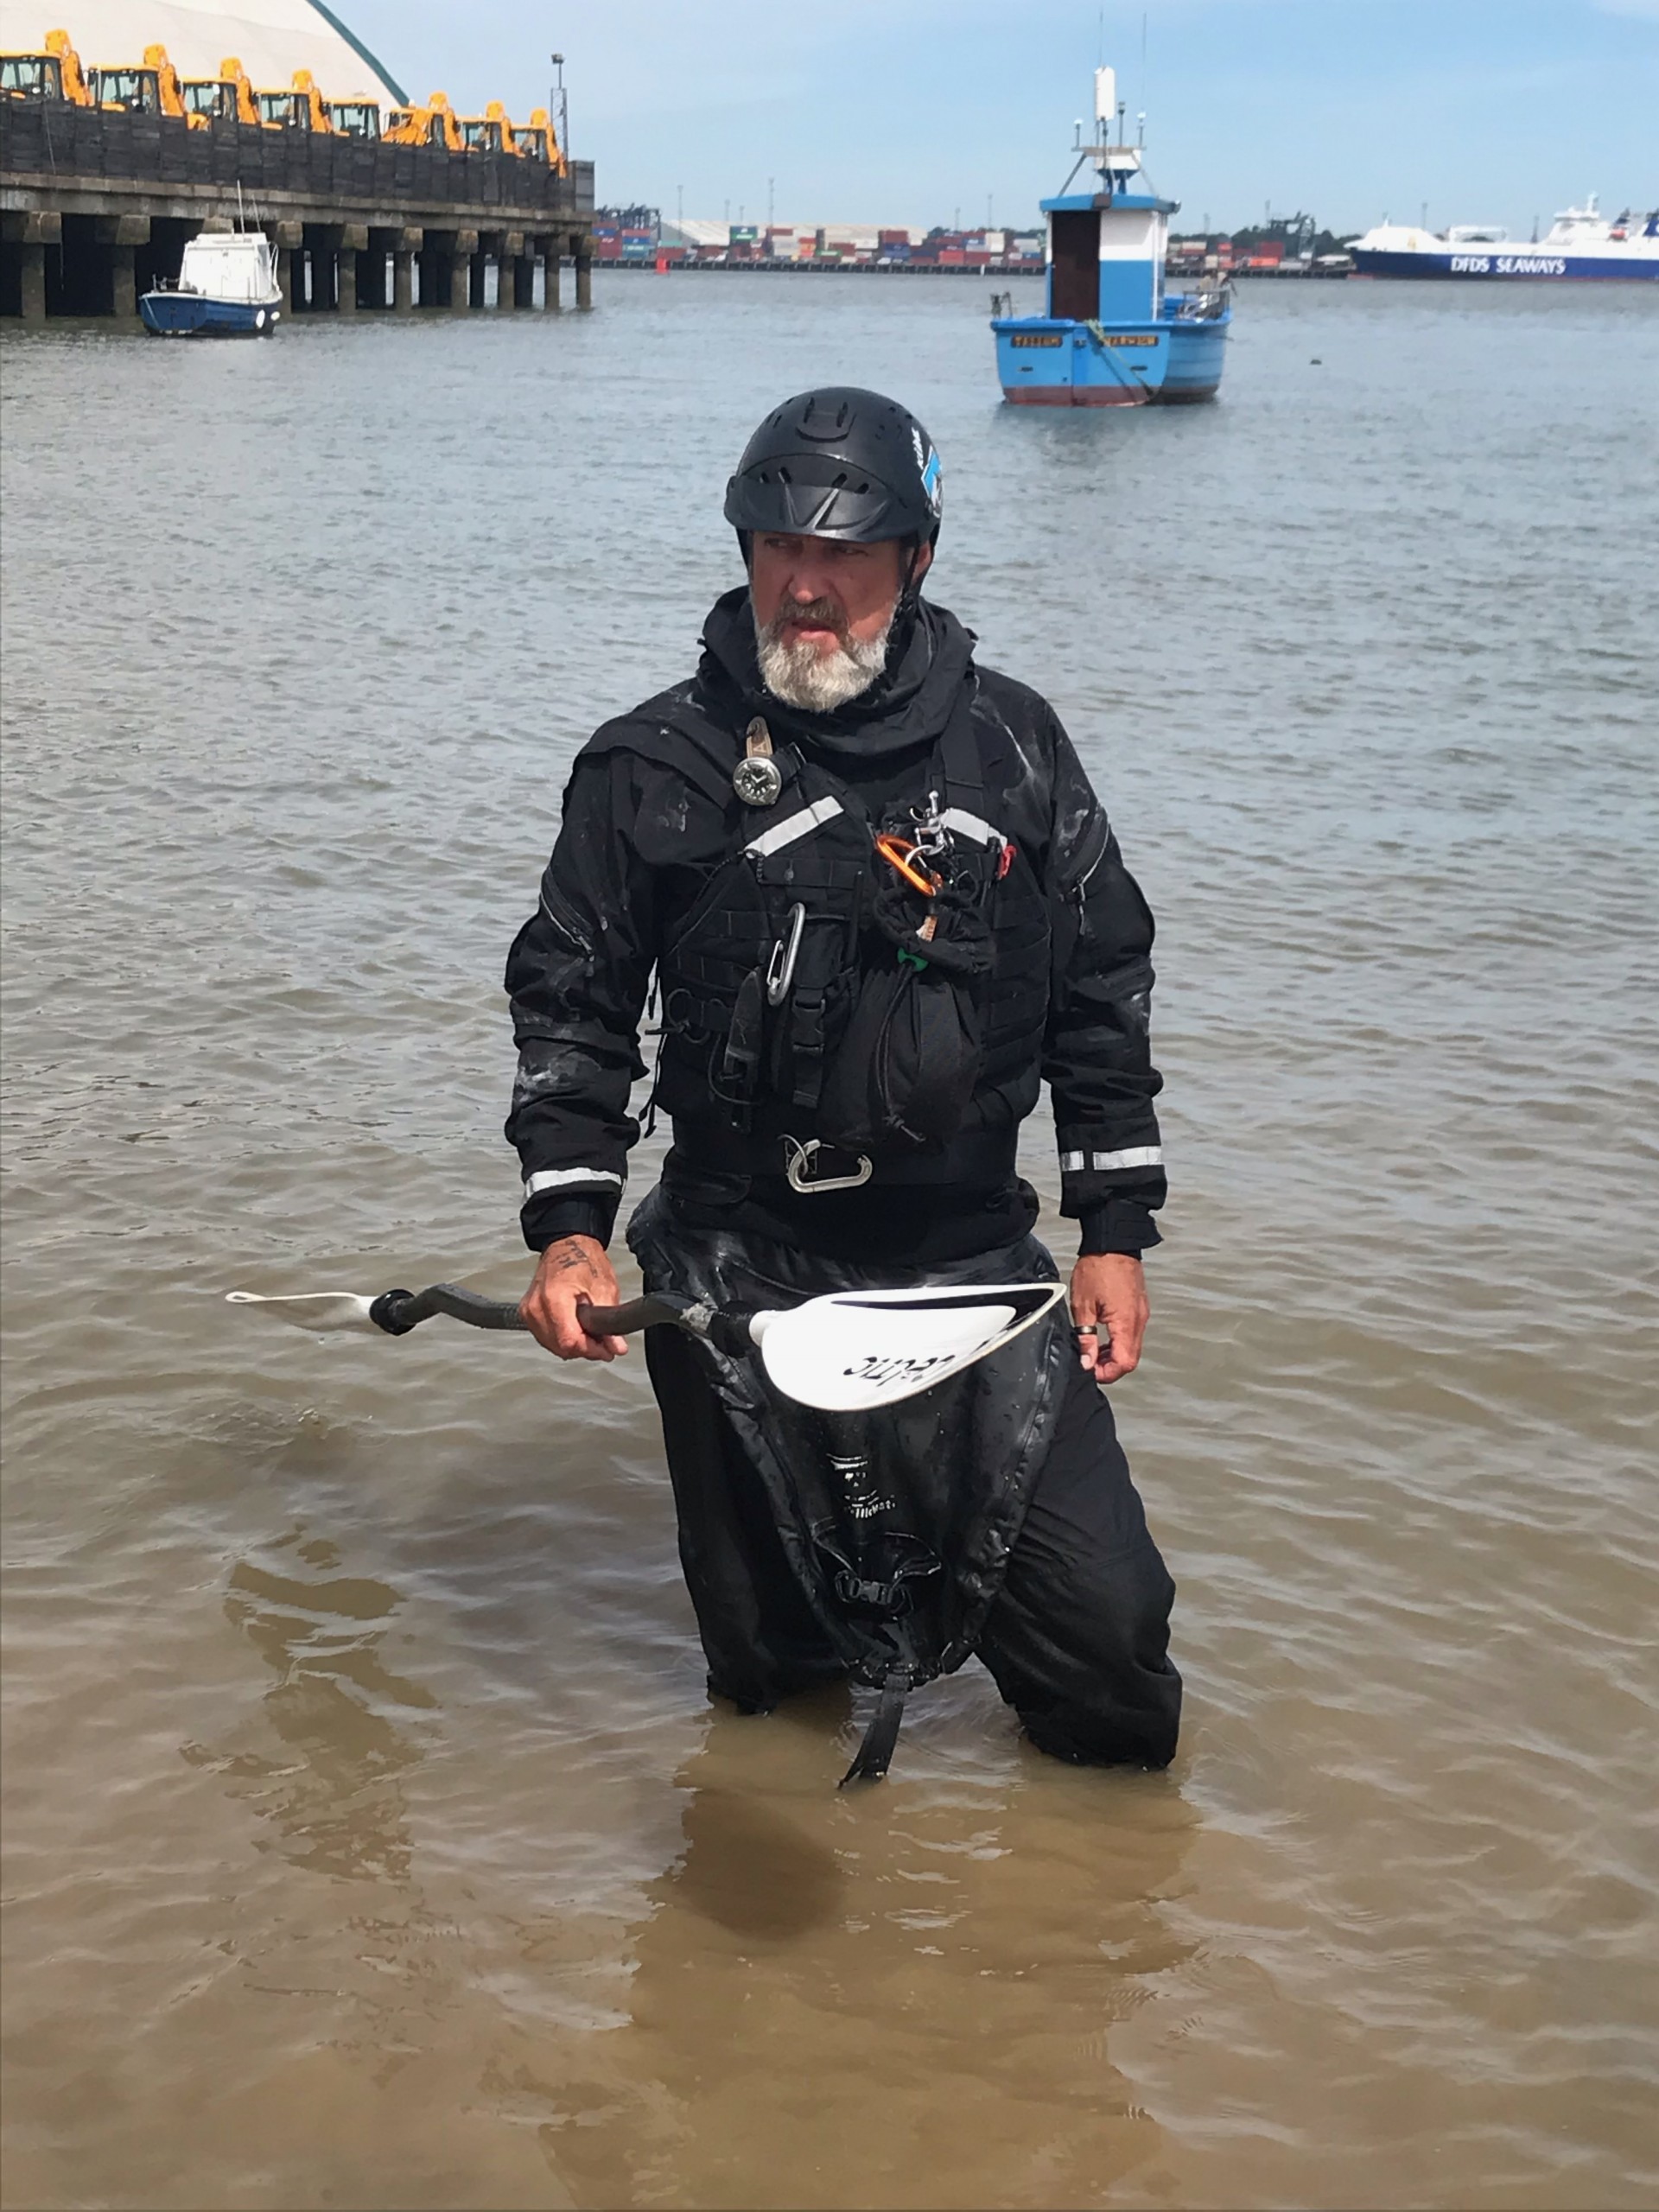 A well dressed sea kayaker in a quality dry suit